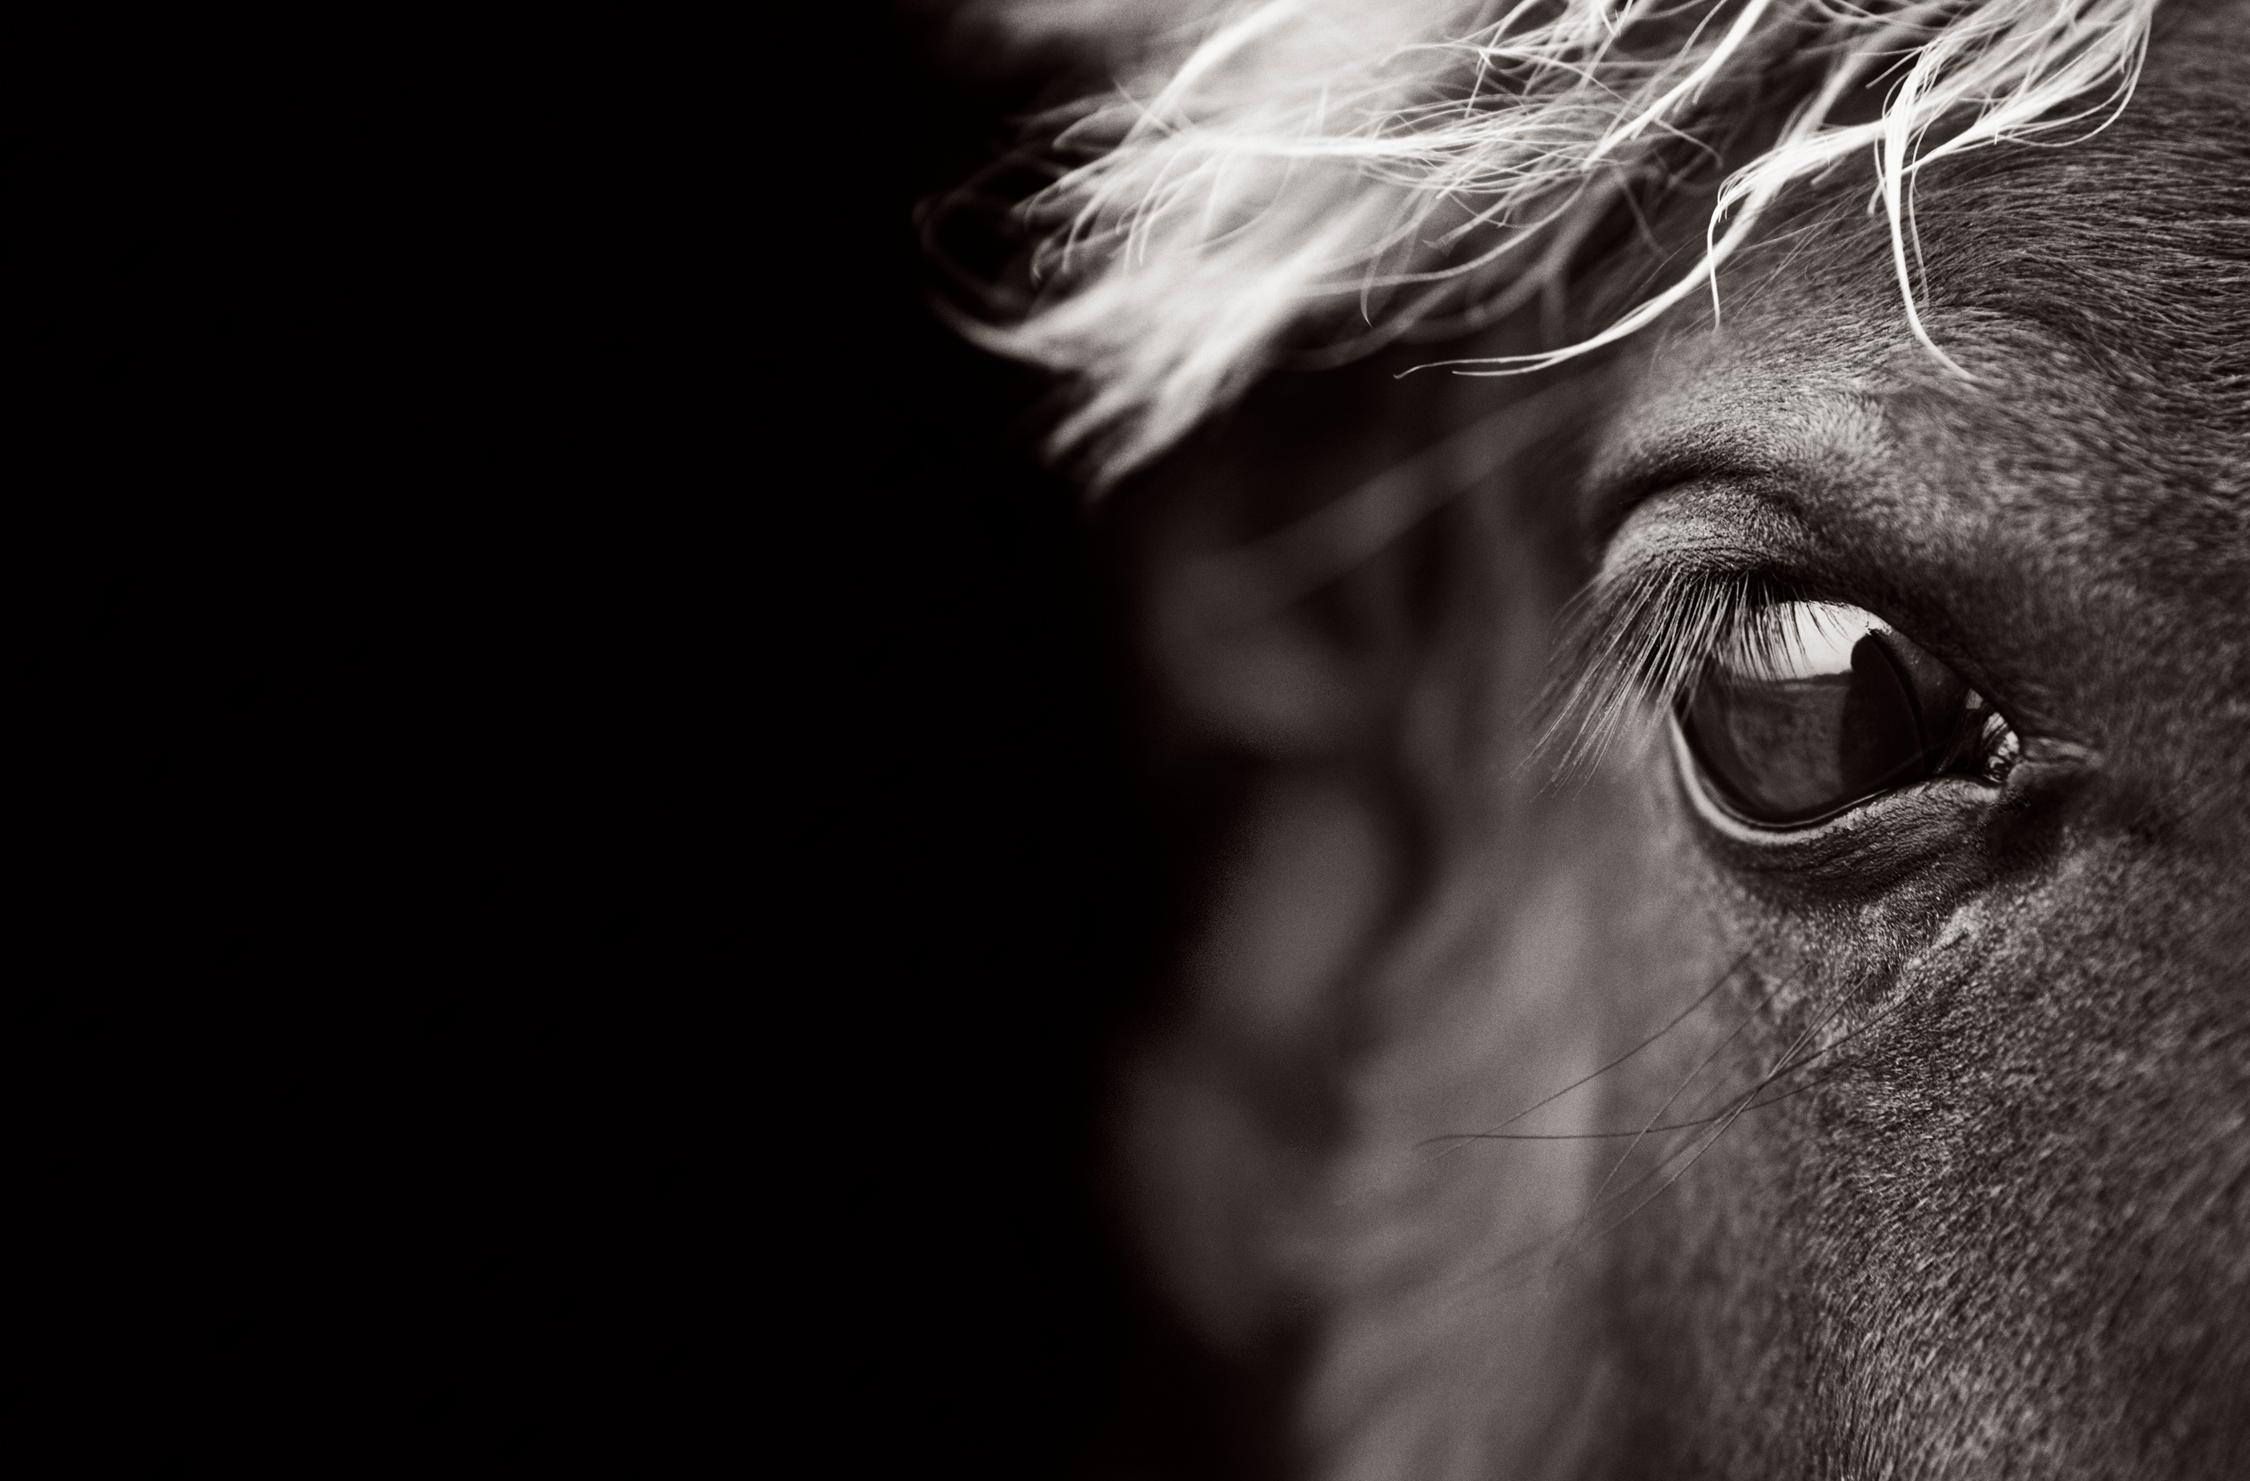 Drew Doggett Black and White Photograph - Close-Up Profile Portrait of a Sable Island Horse, Iconic, Meditative